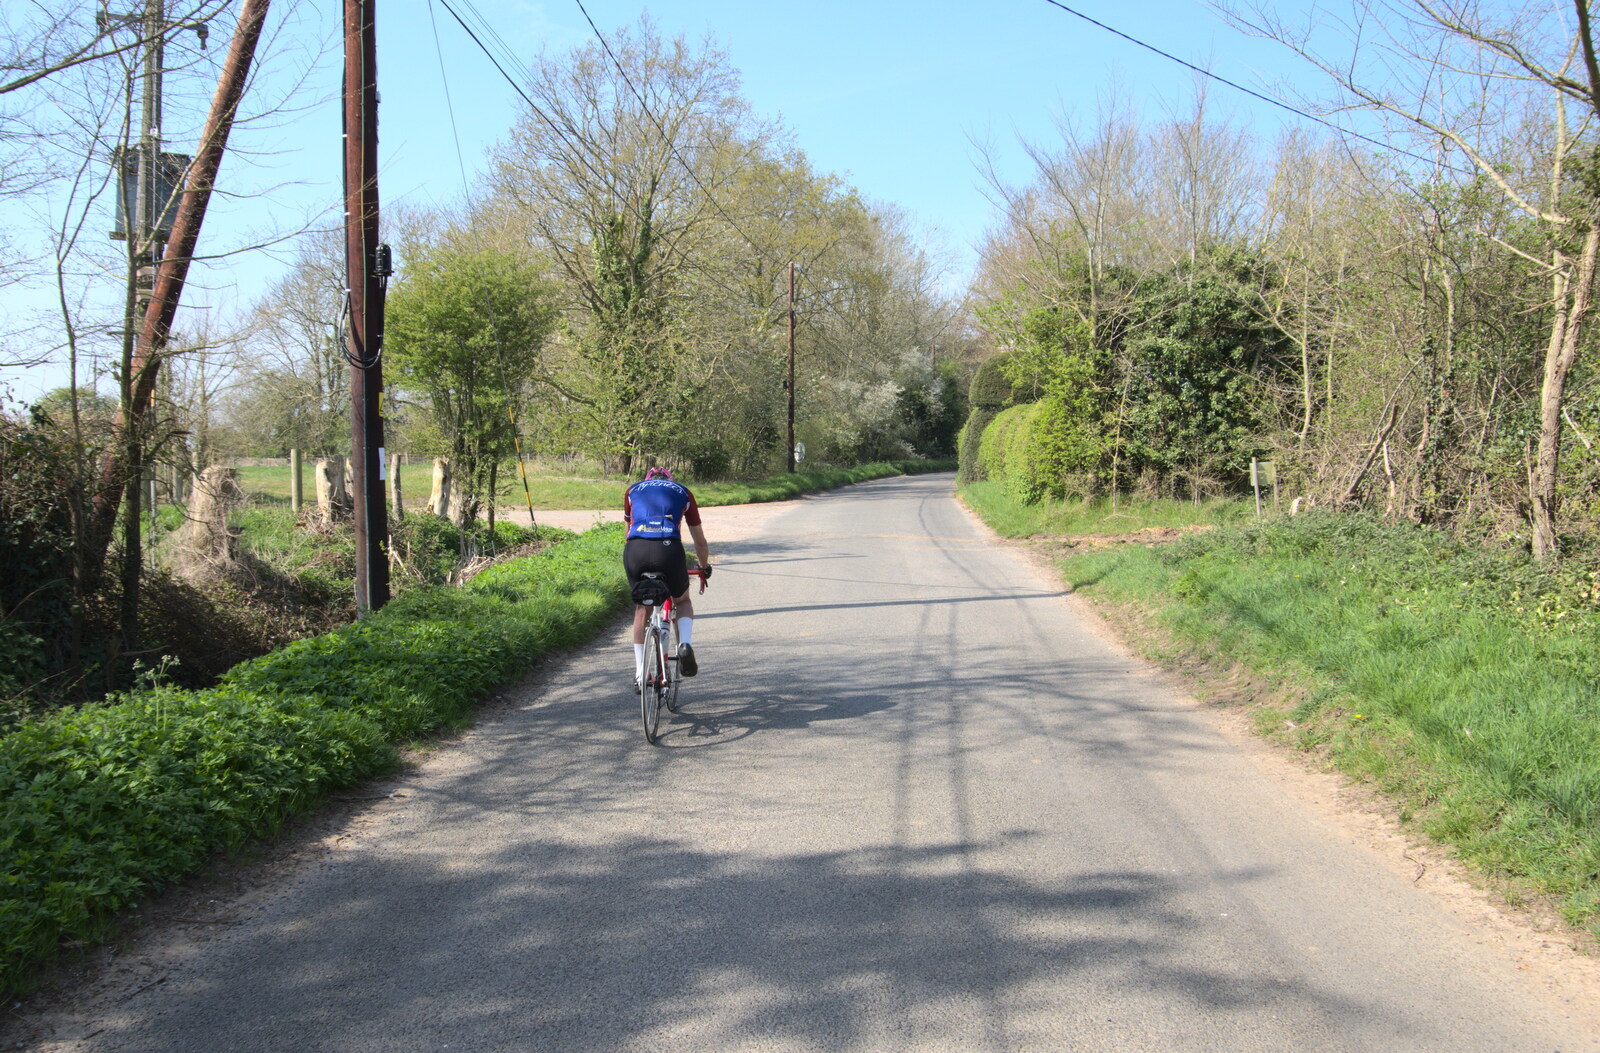 Marticle heads off on his 'official exercise' from A Weekend Camping Trip in the Garden, Brome, Suffolk - 11th April 2020